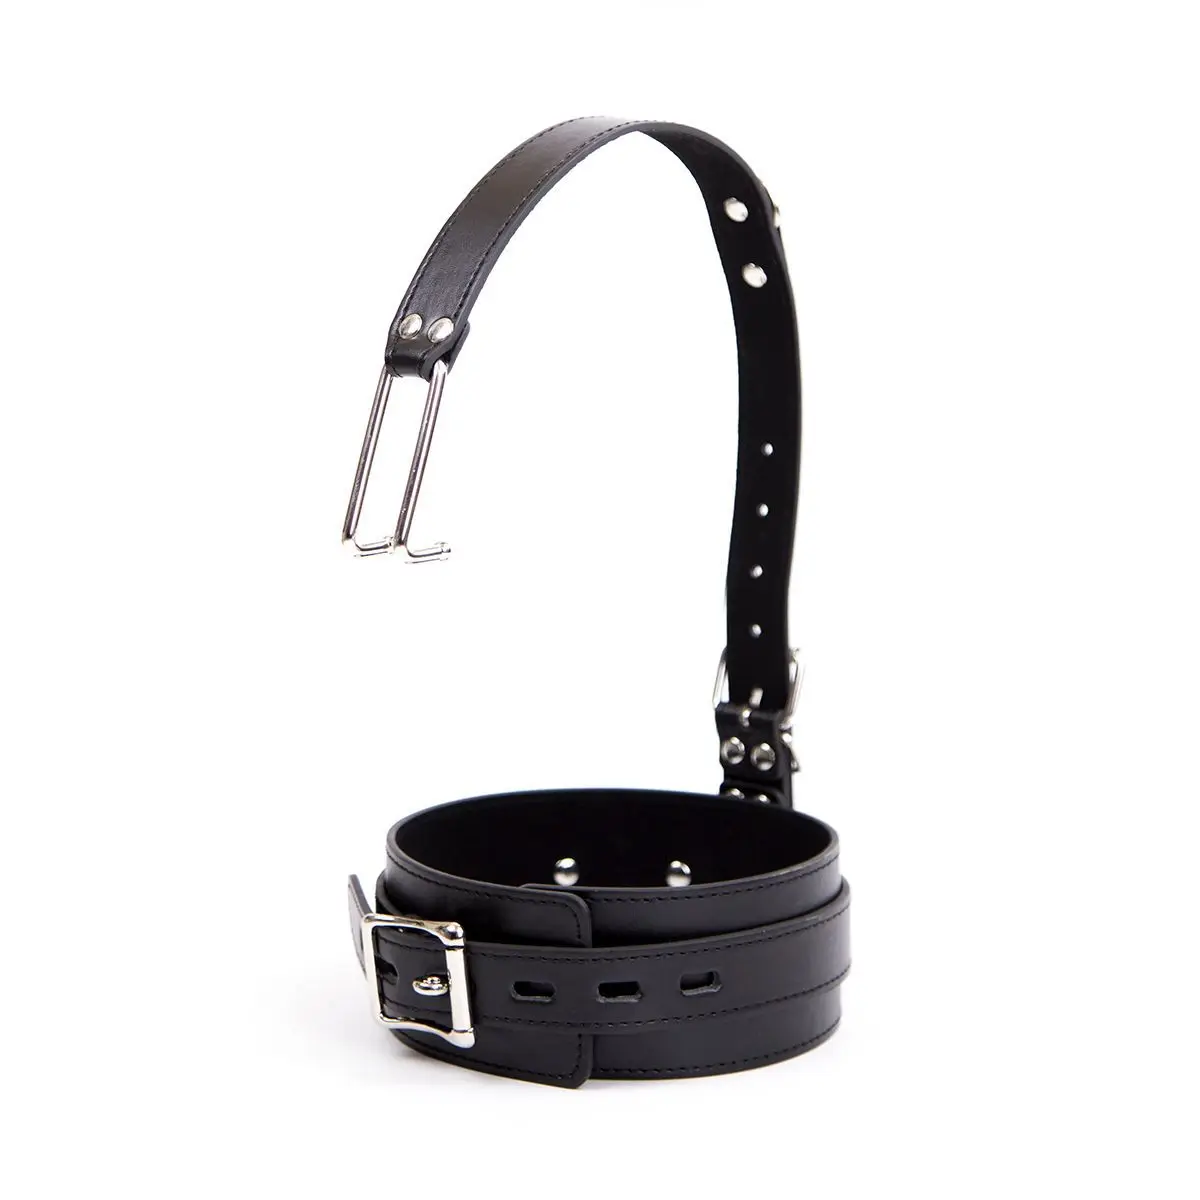 

Slave Bondage Leather Choker Collar Strap with Smooth Stainless Steel Nose Hook for Fetish Bdsm Restraint Flirting Sex Toys